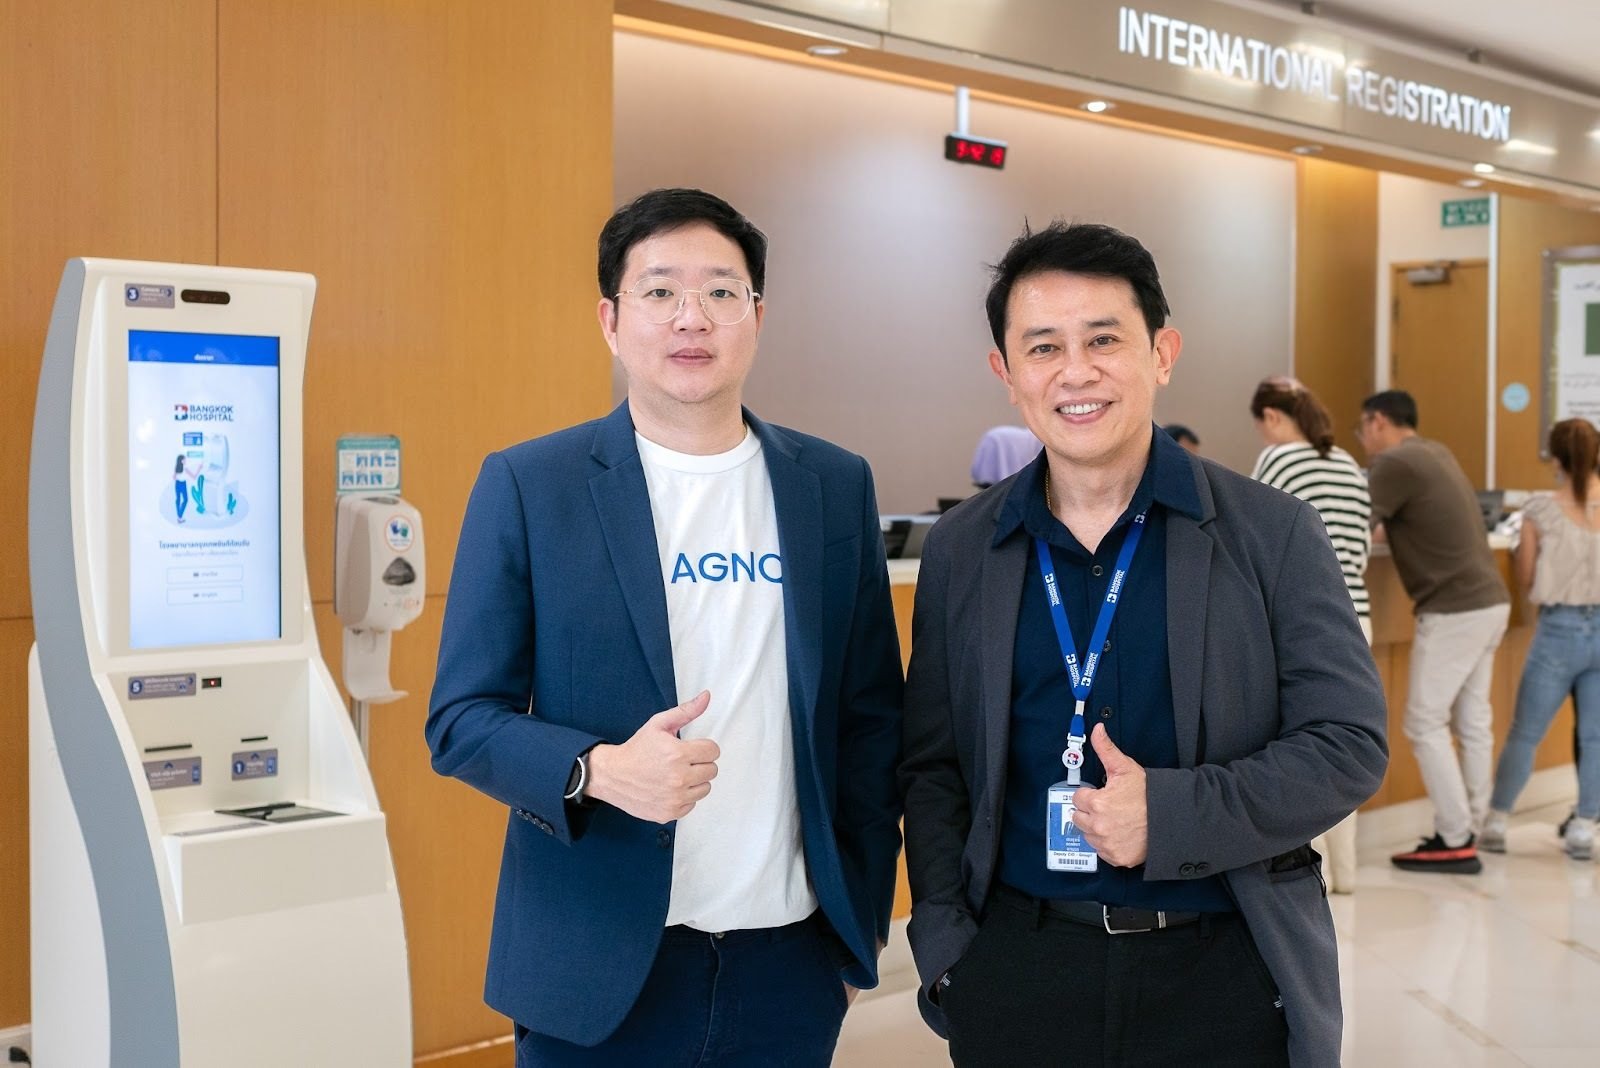 Agnos Health CEO Paphonwit Chaiwatanodom (left) at Bangkok Hospital in Thailand assisting with smart online registration for patients. Photo: Agnos Health